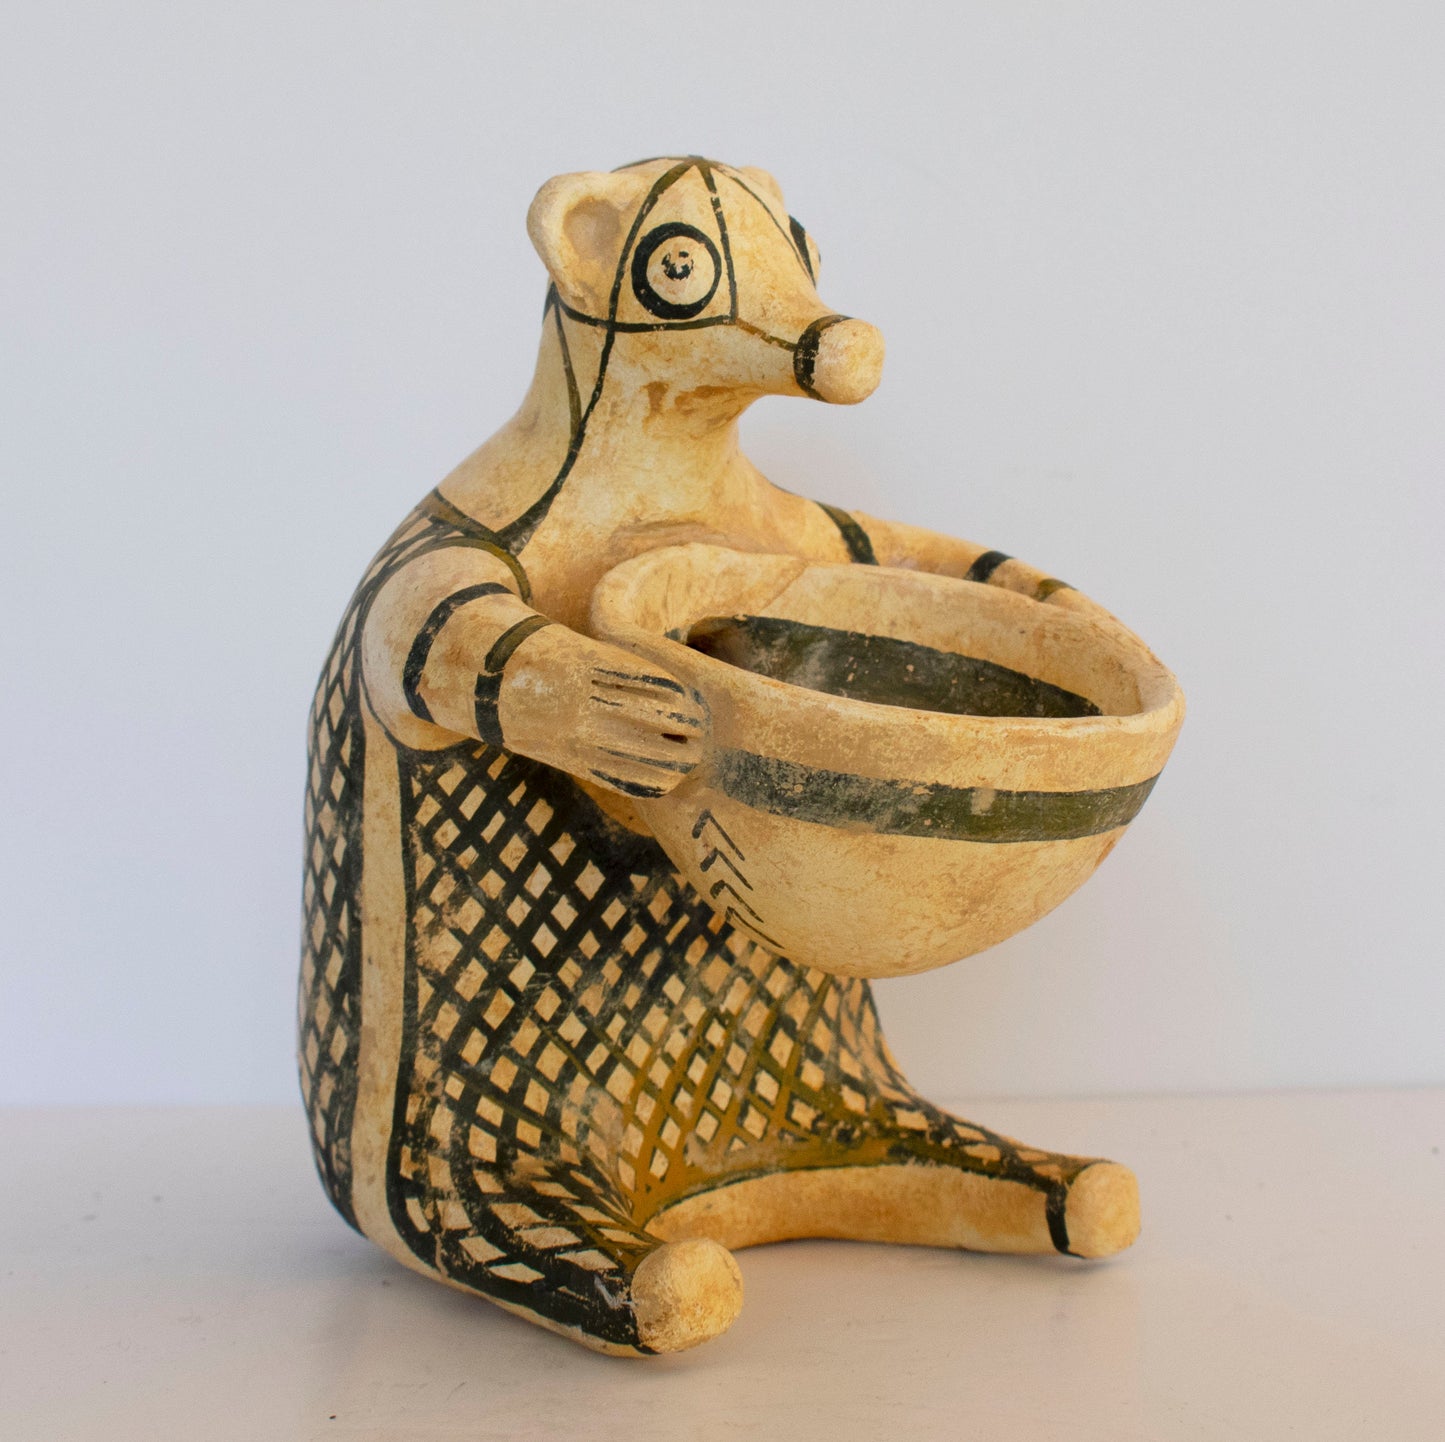 Vase in the shape of an Animal - A little Bear or Hedgehog holding a Bowl - National Athens Museum - Reproduction - Ceramic Artifact